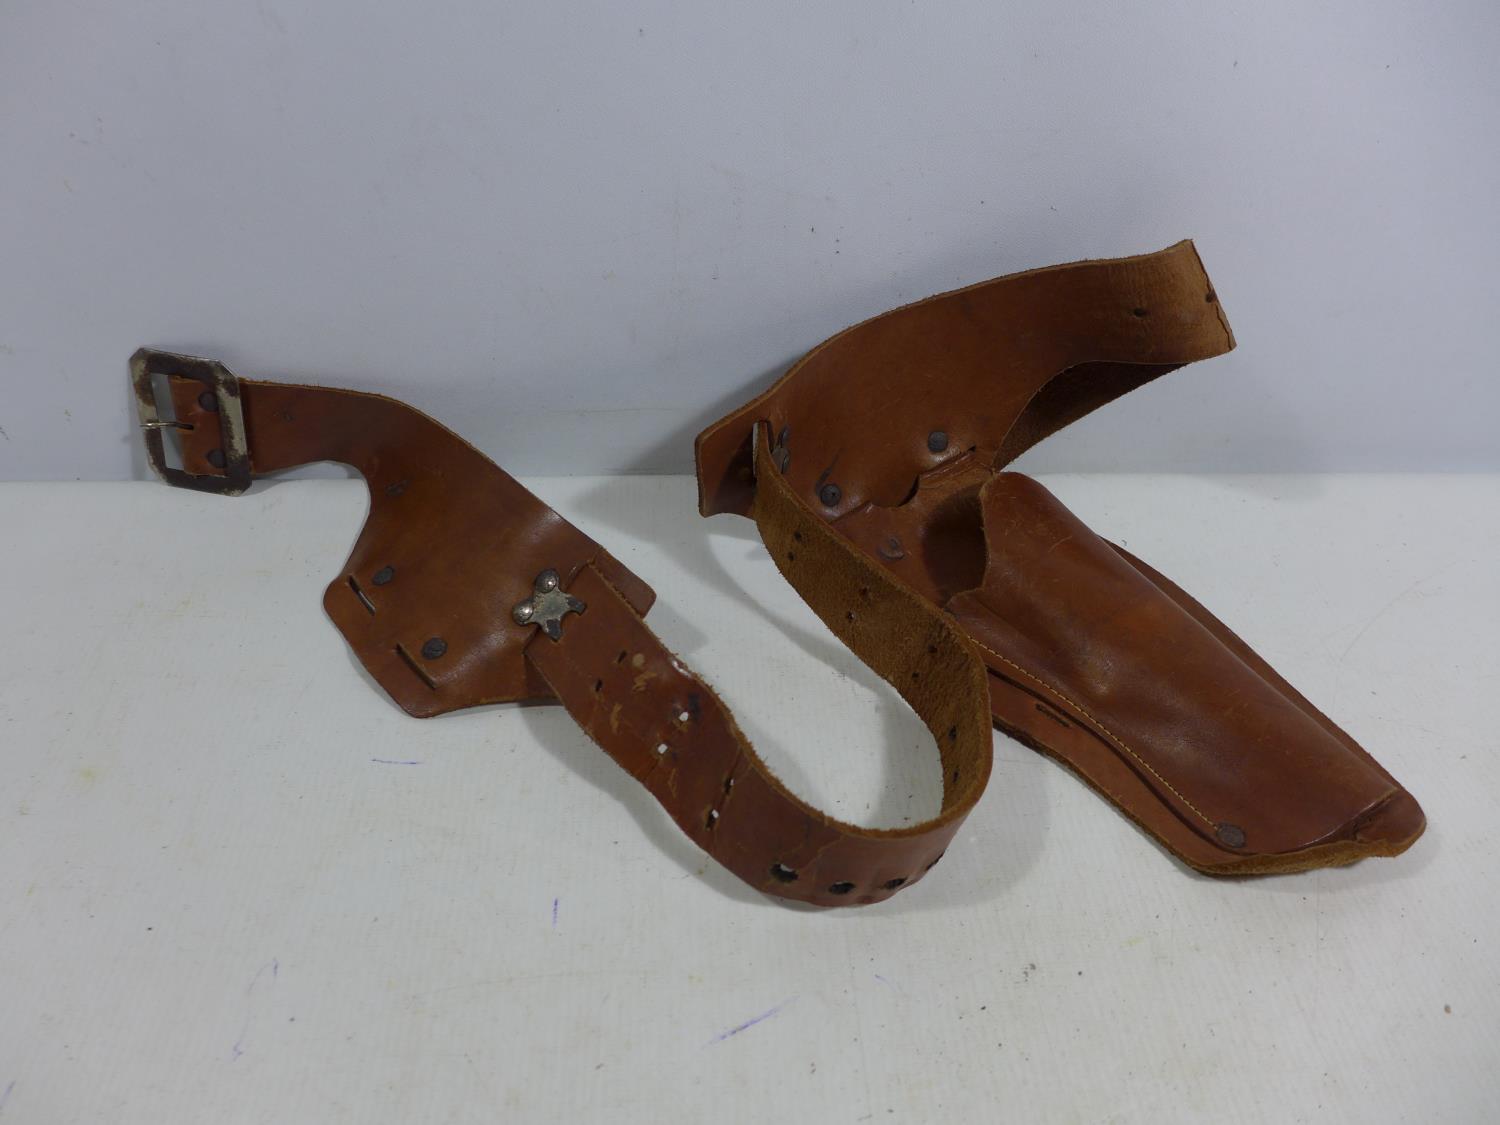 A LEATHER GUN HOLSTER AND BELT